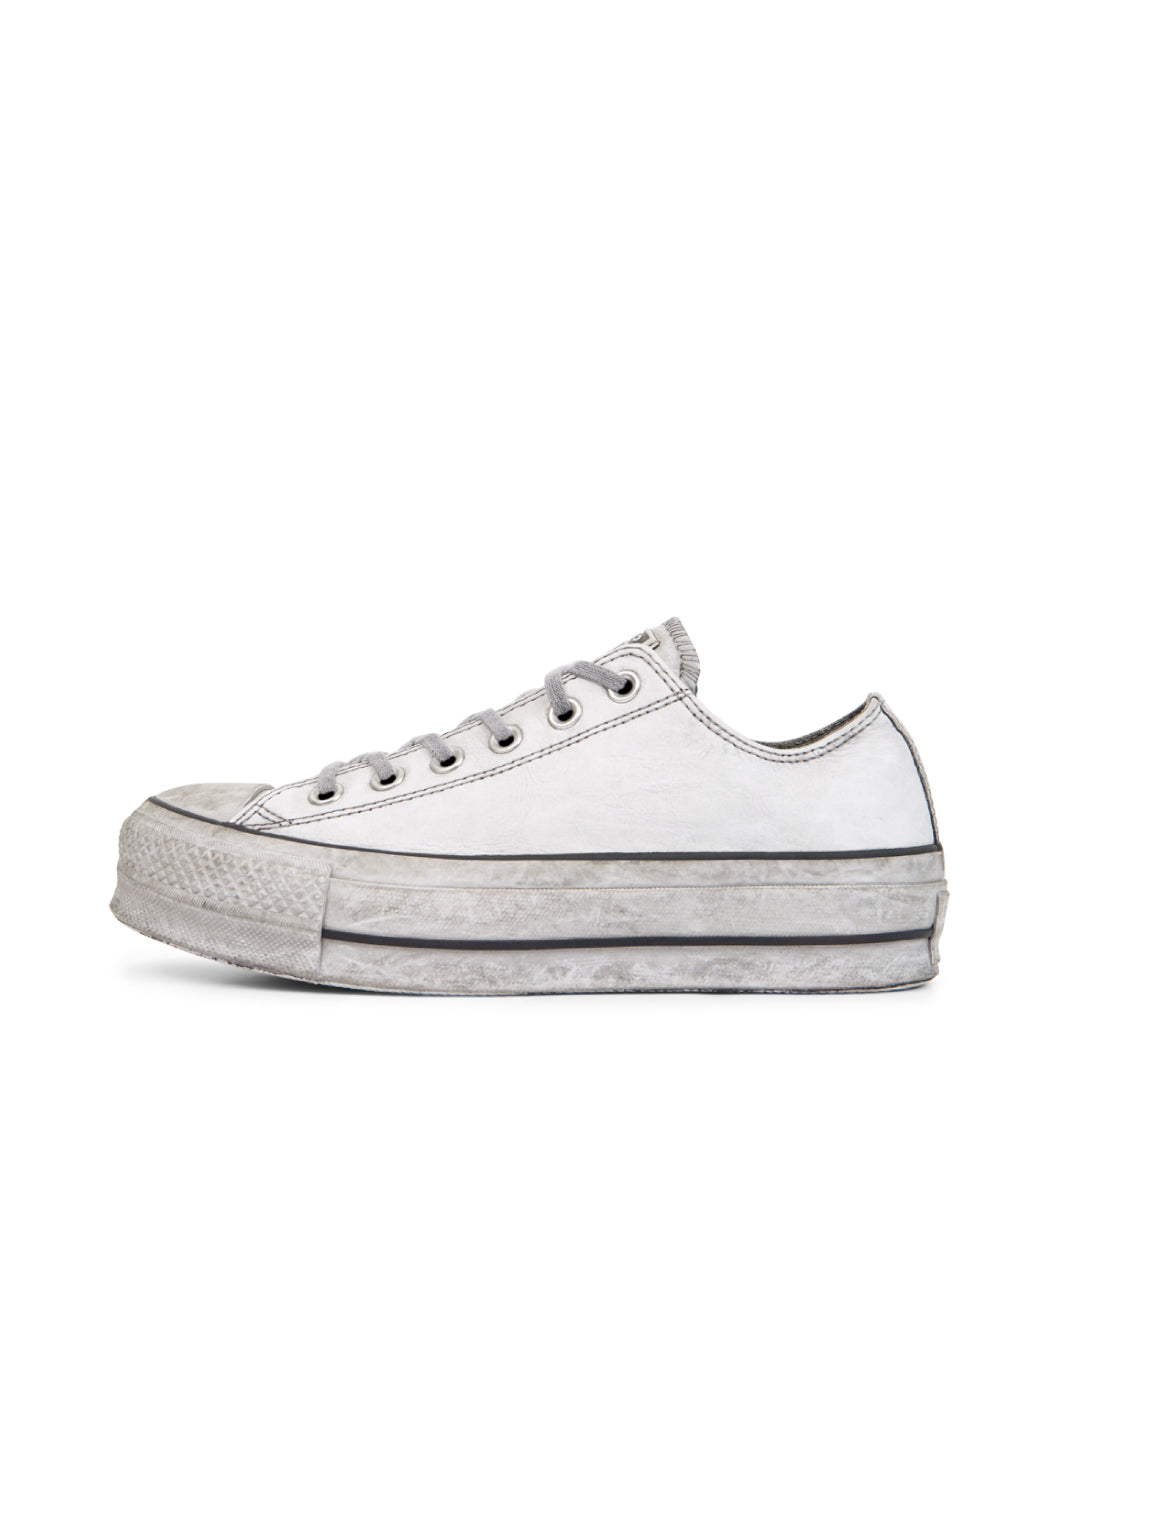 CONVERSE-Chuck Taylor All Star Platform Low in Pelle - Bianco-TRYME Shop